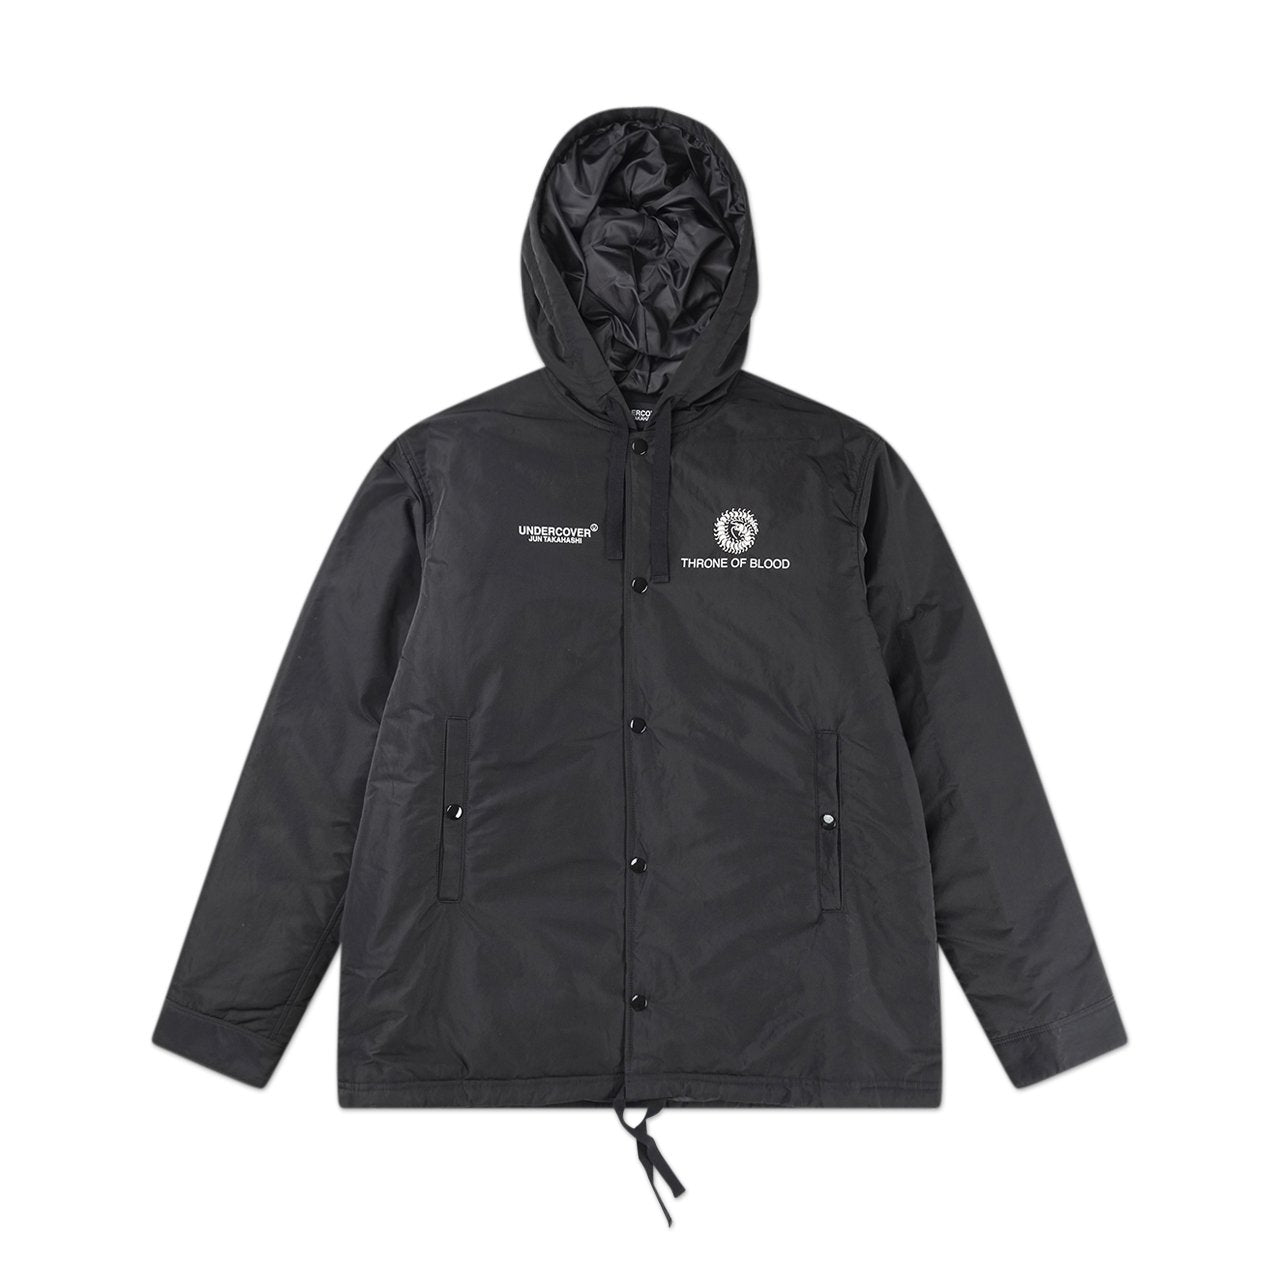 undercover 'throne of blood' hooded jacket (black)